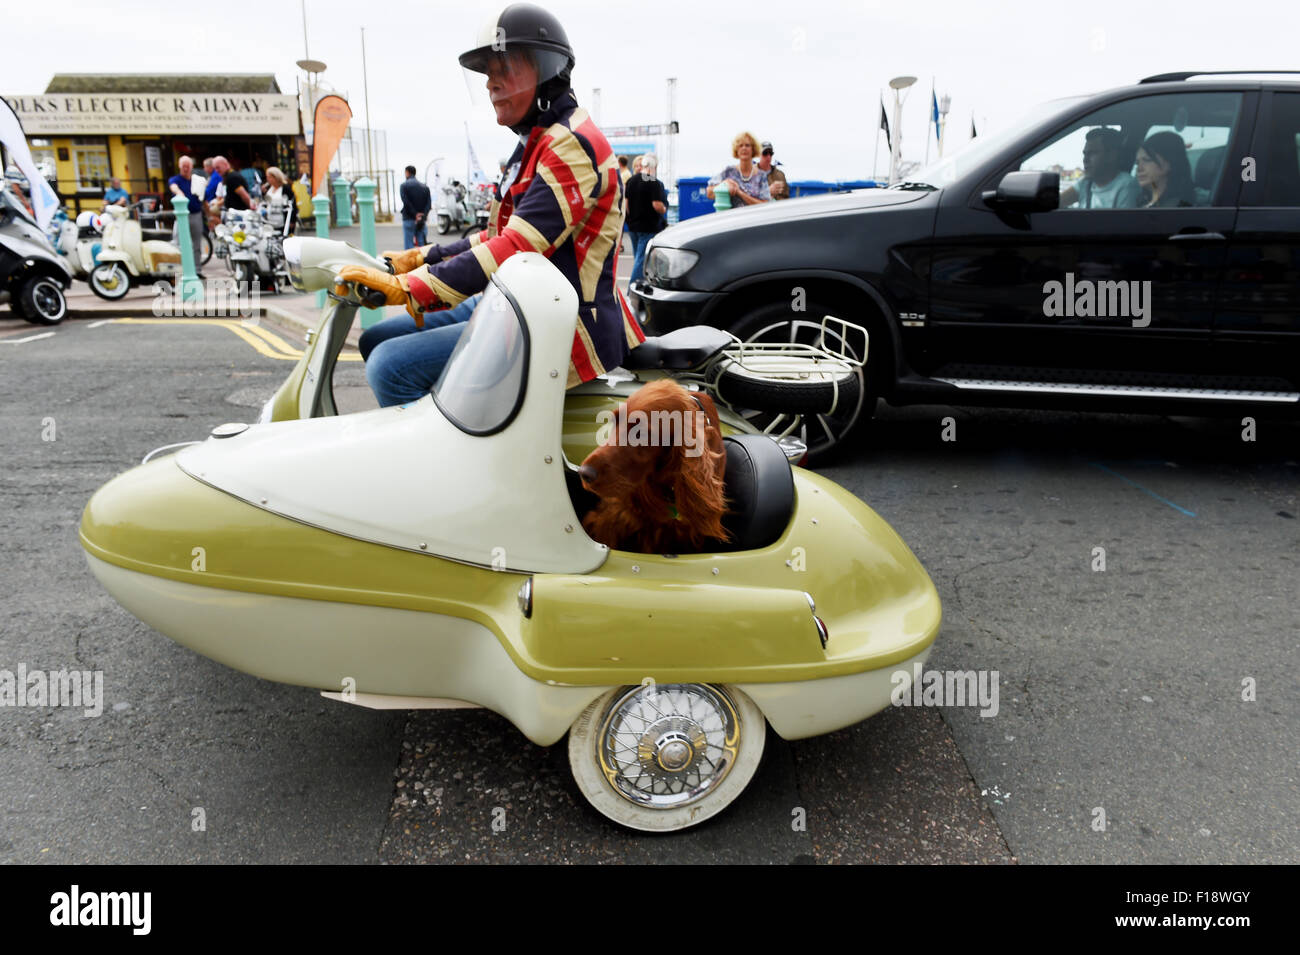 Brighton, UK. 30th August, 2015. A red setter dog rides in the sidecar of a scooter arriving for the Mod Weekender event in Brighton today Thousands of Mods with their scooters descend on Brighton for the annual Mod Weekender event which is a 3 day celebration of their vehicles , fashion and the 1960s Stock Photo